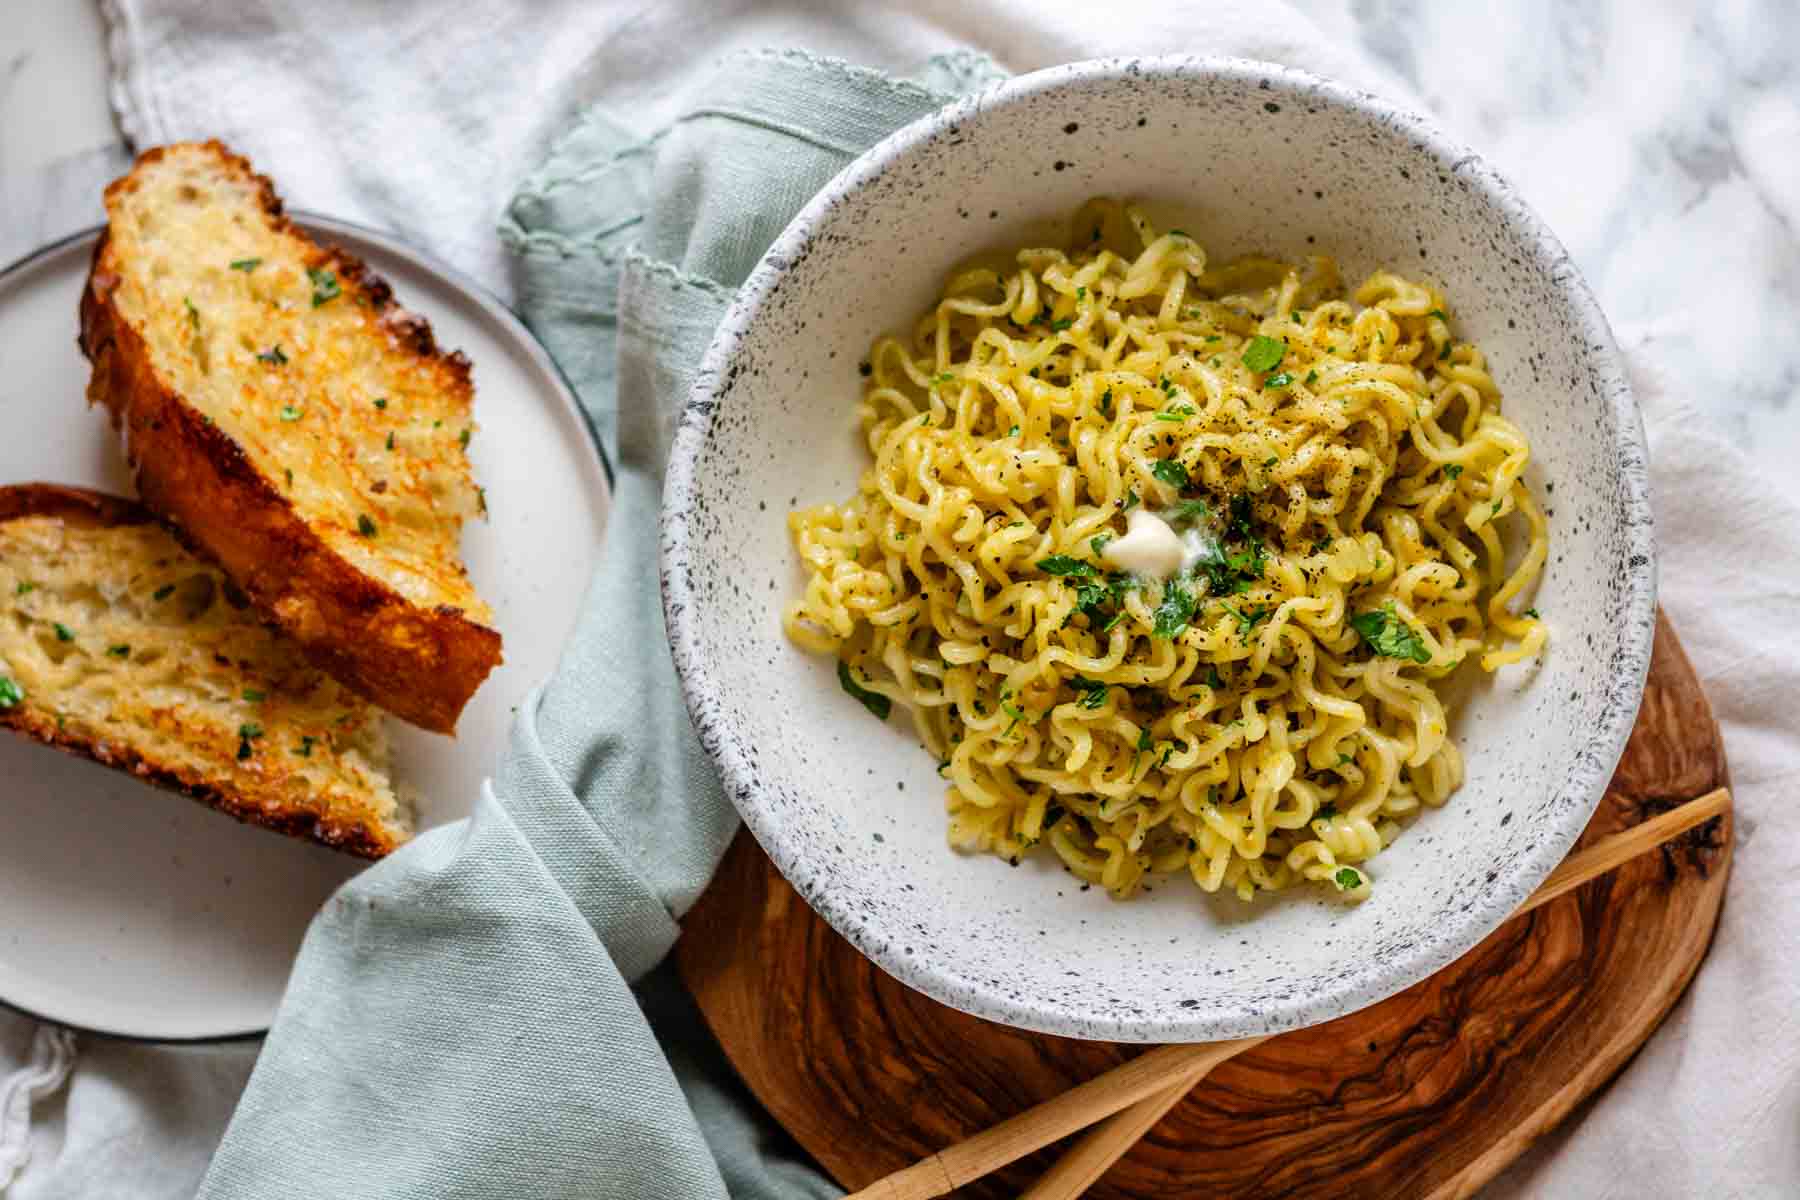 Vegan buttered noodles in a white bowl with garlic toast.